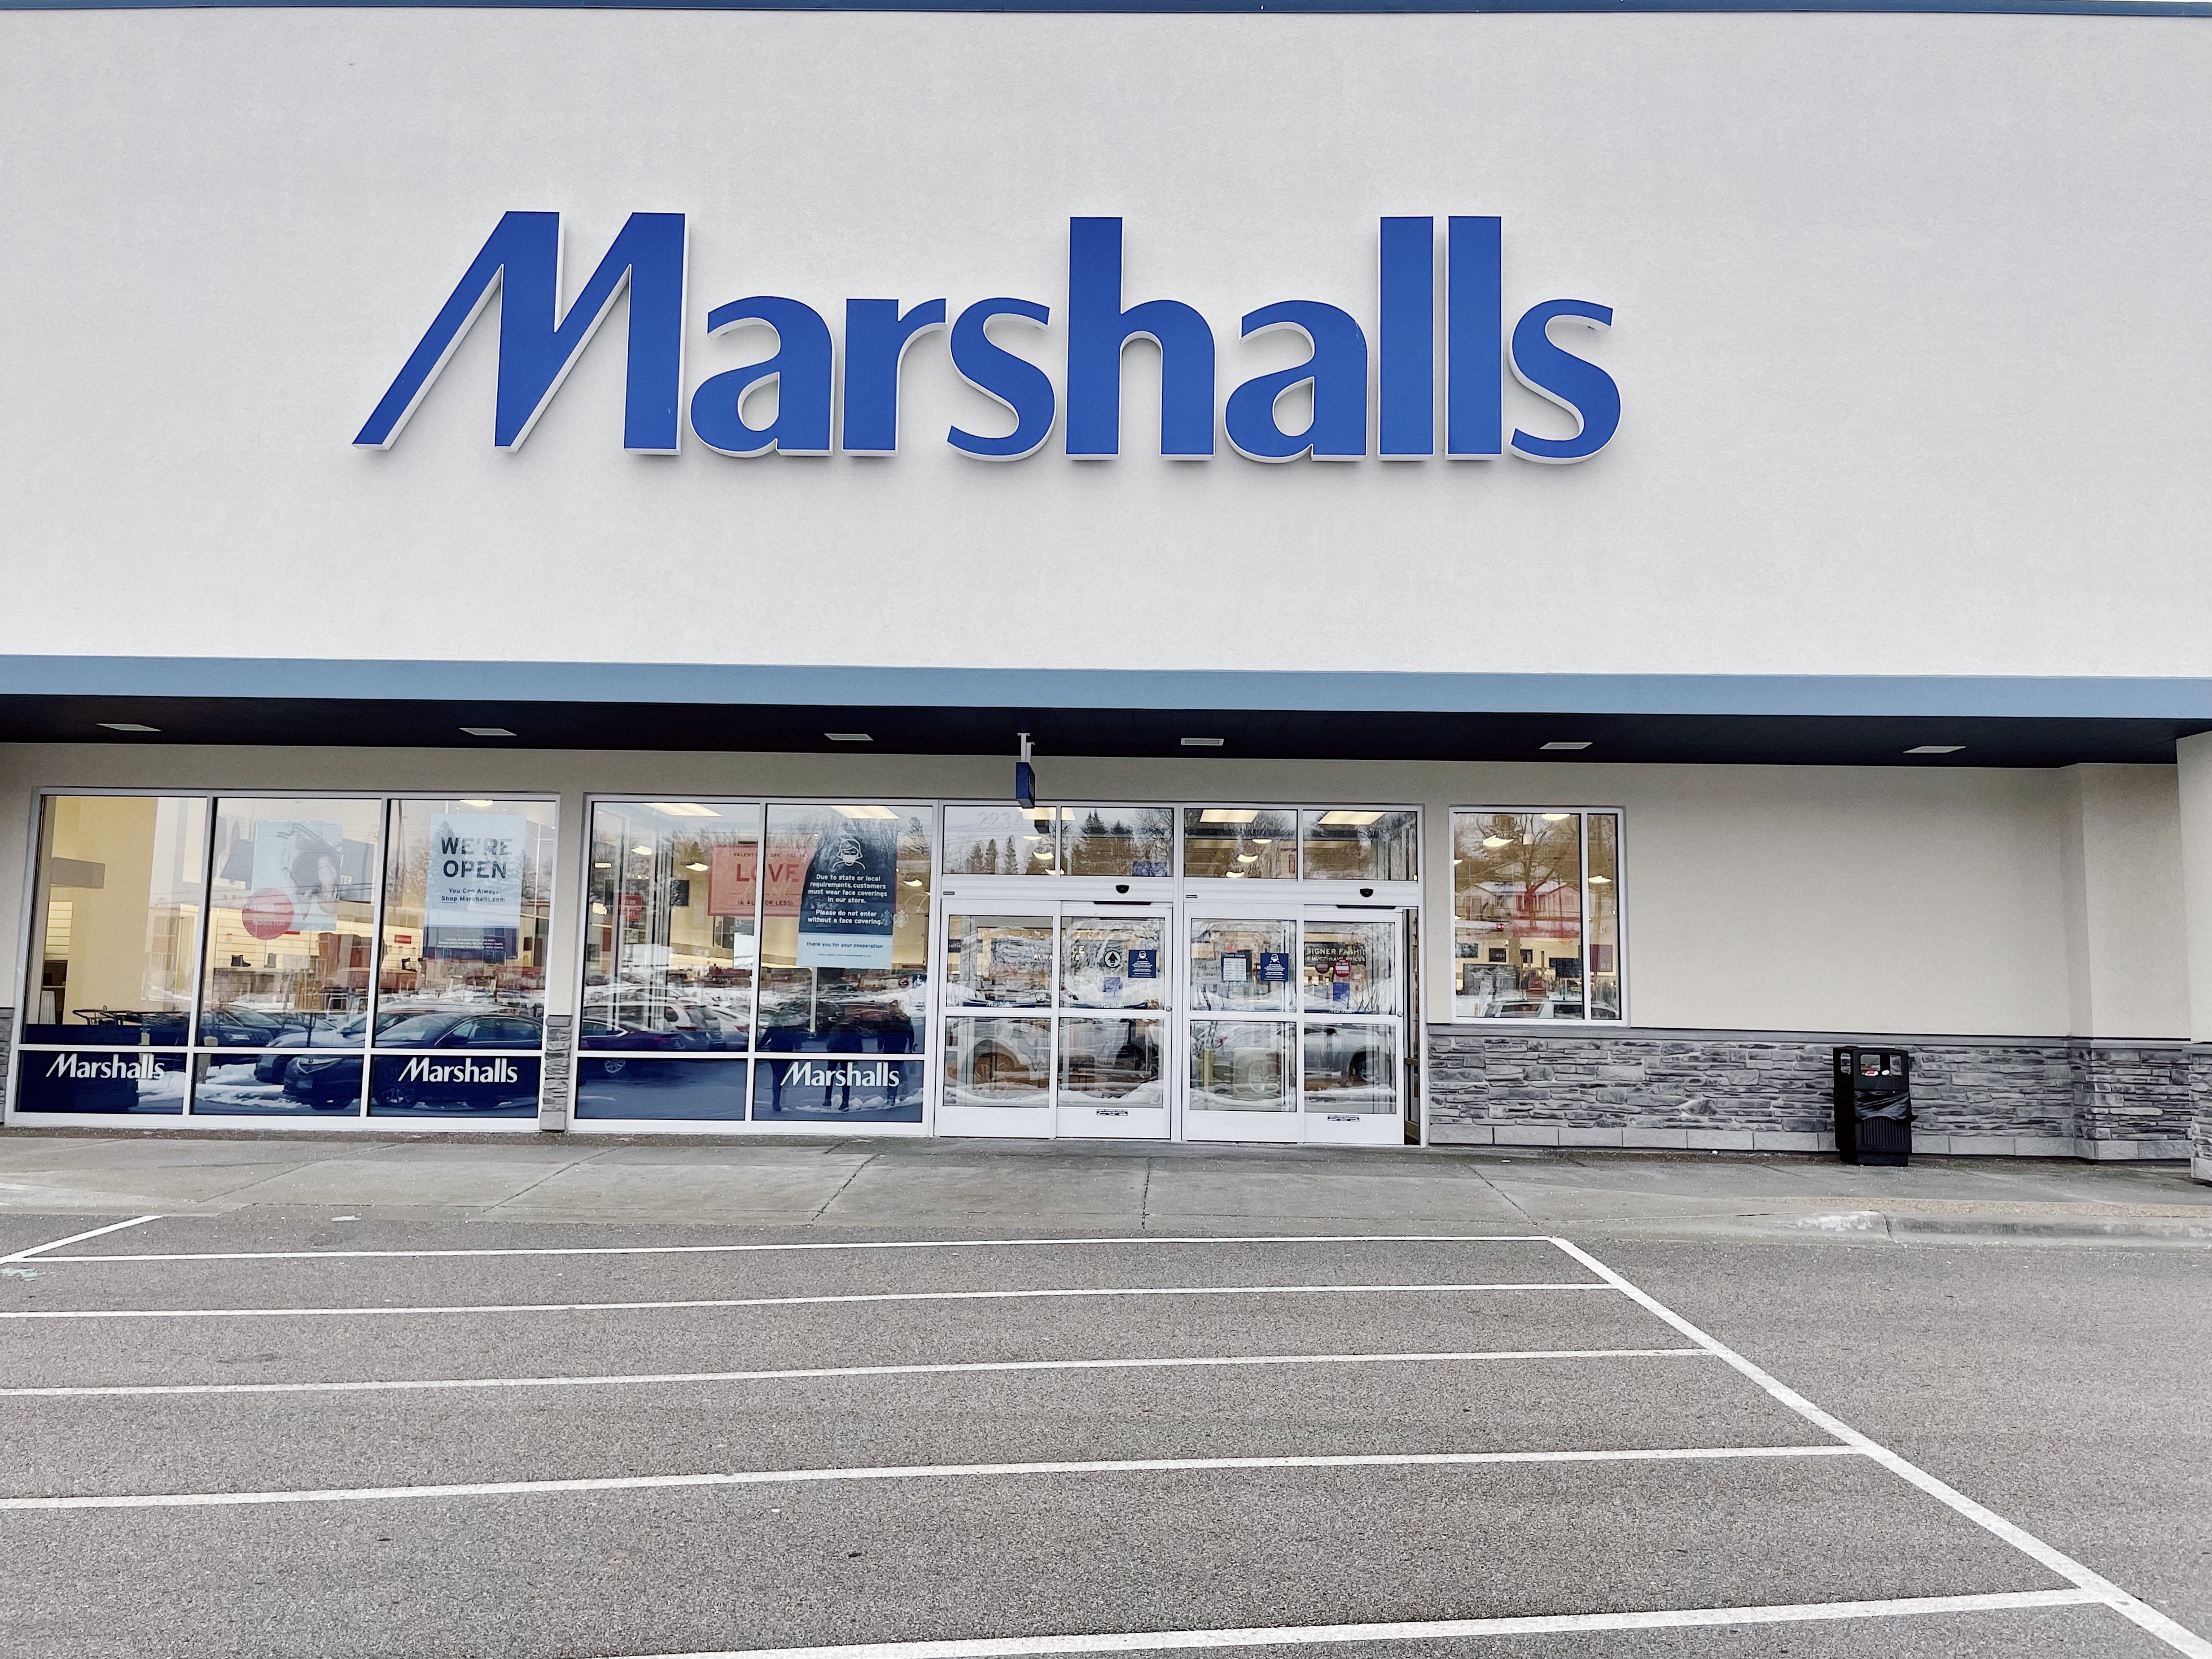 Marshalls Handbags Shoes & Clothes Home Finds & More 